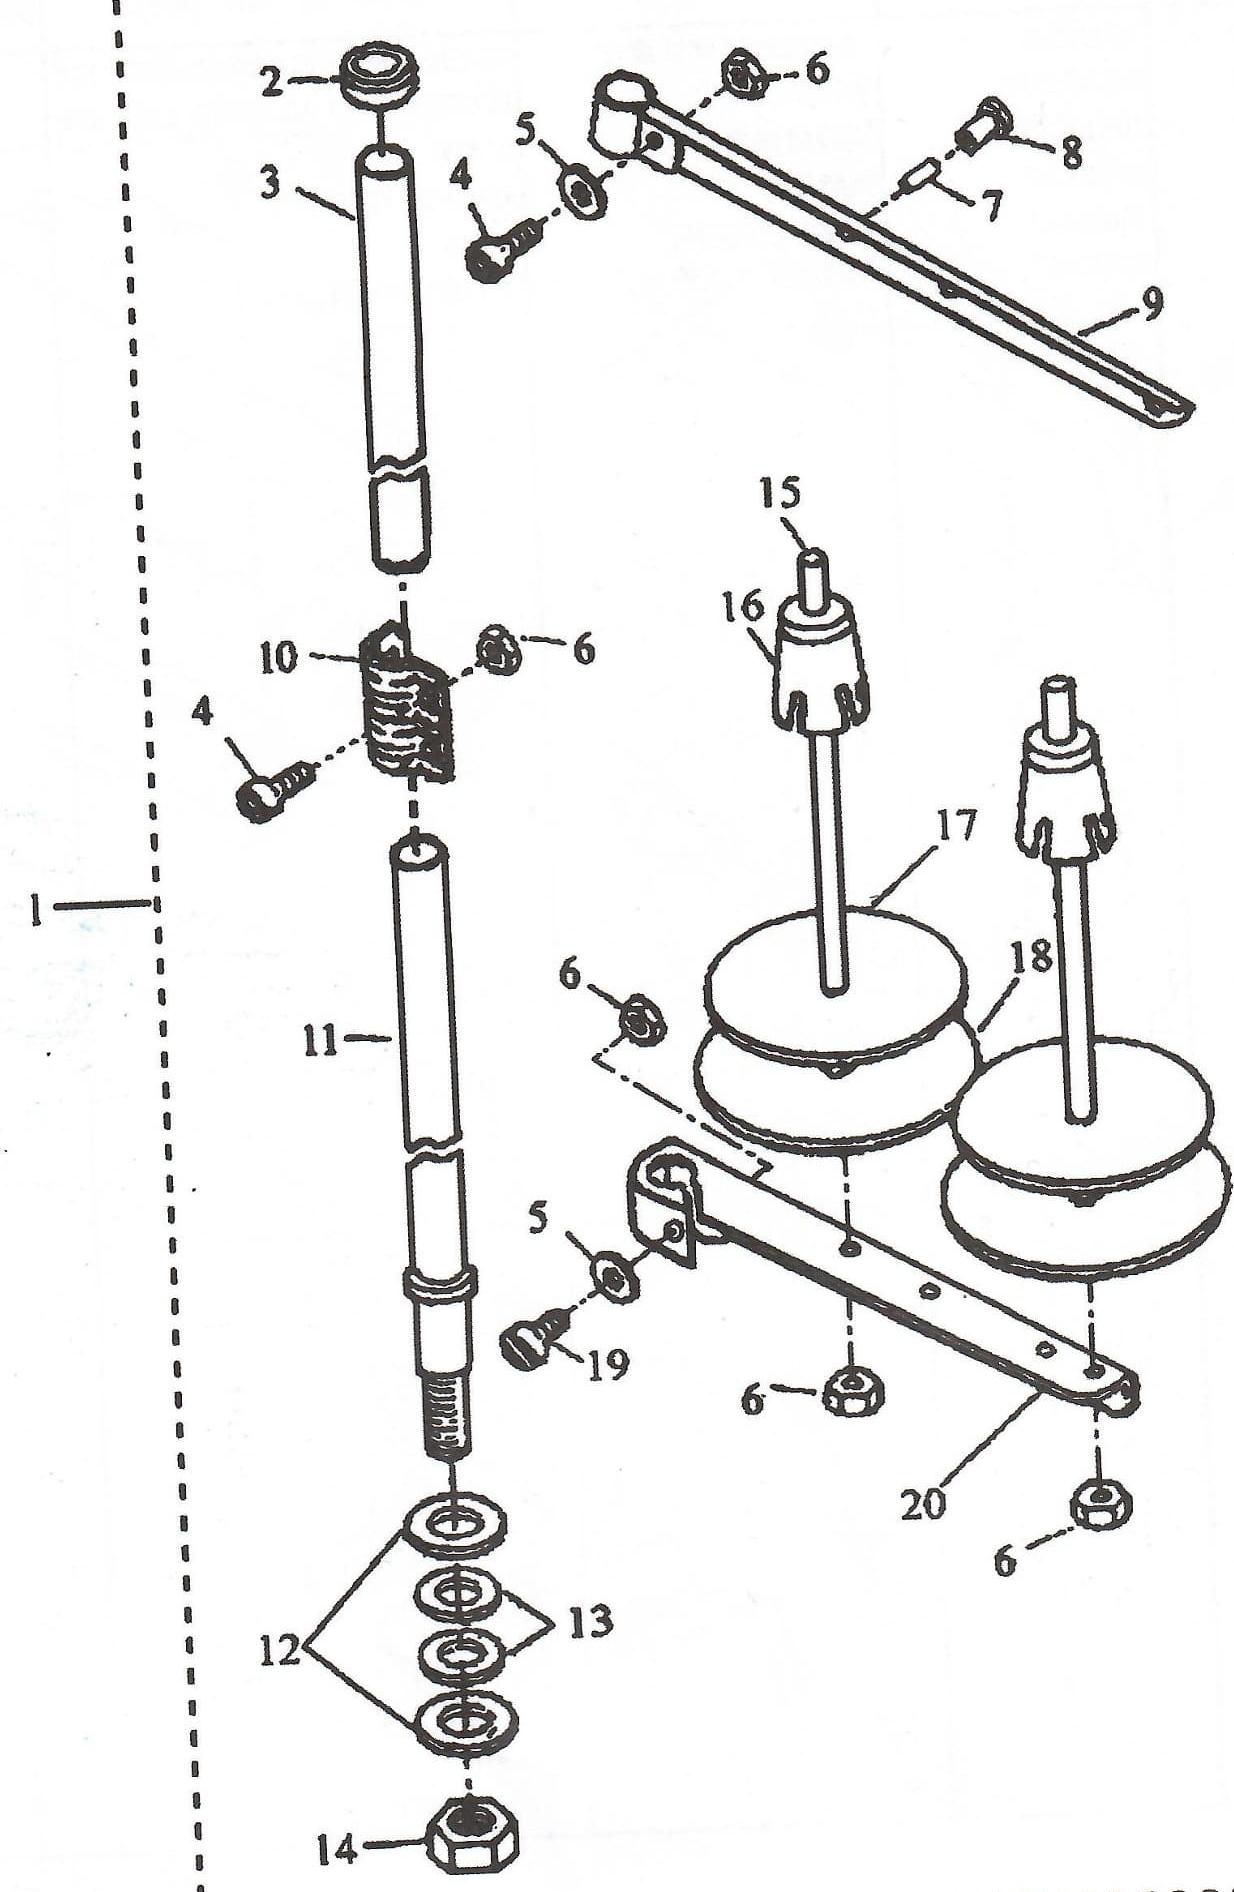 10 THREAD STAND COMPONENTS